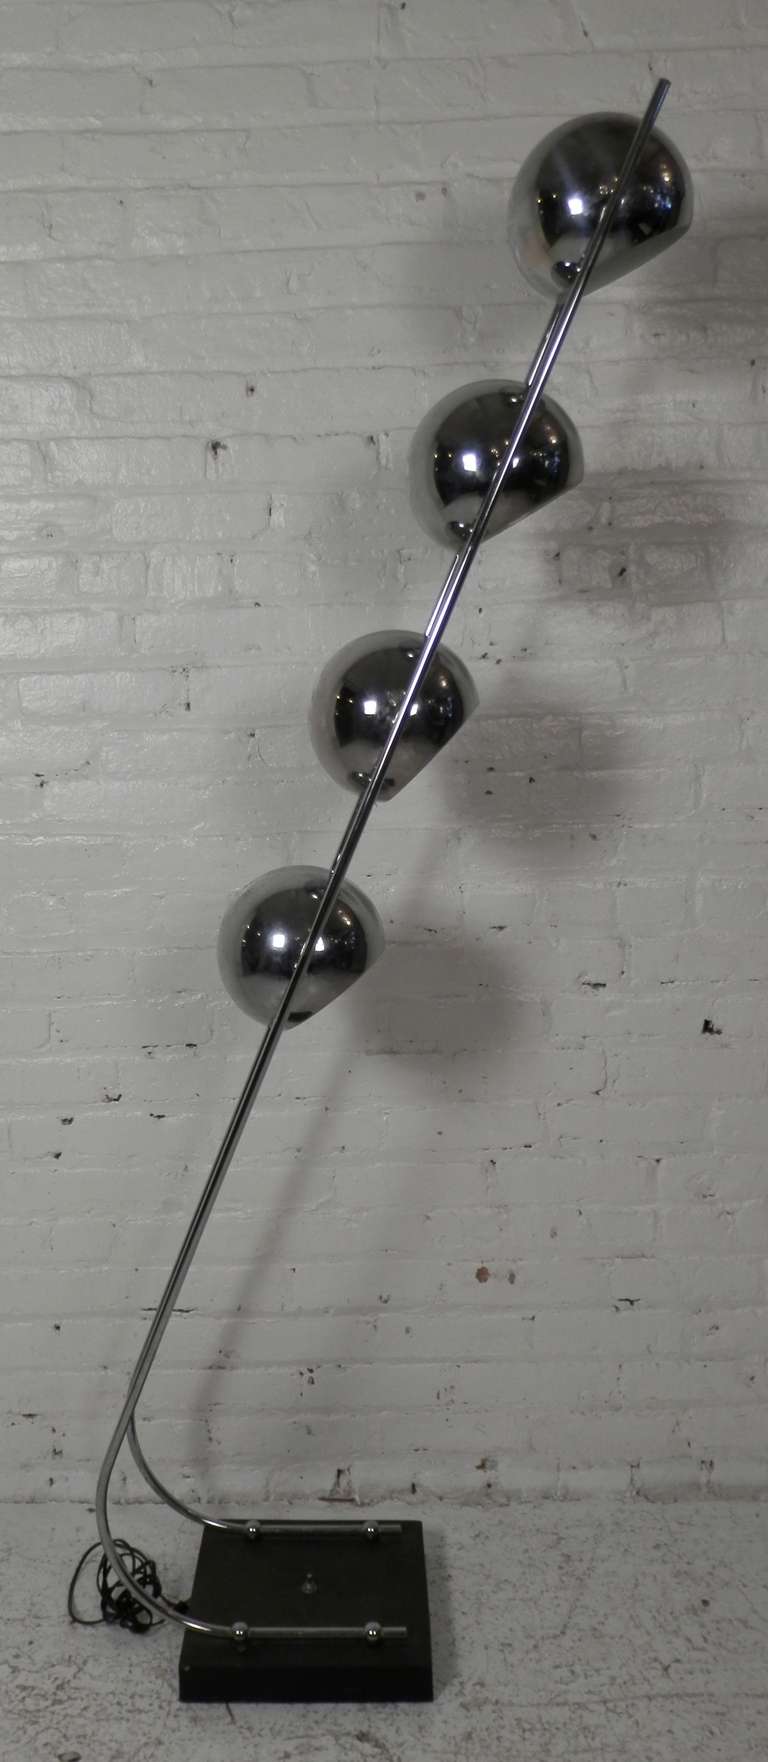 Mid-century modern floor lamp with four eyeball socket shades set upon arching arms. Shades rotate, switch on base.

(Please confirm item location - NY or NJ - with dealer)
